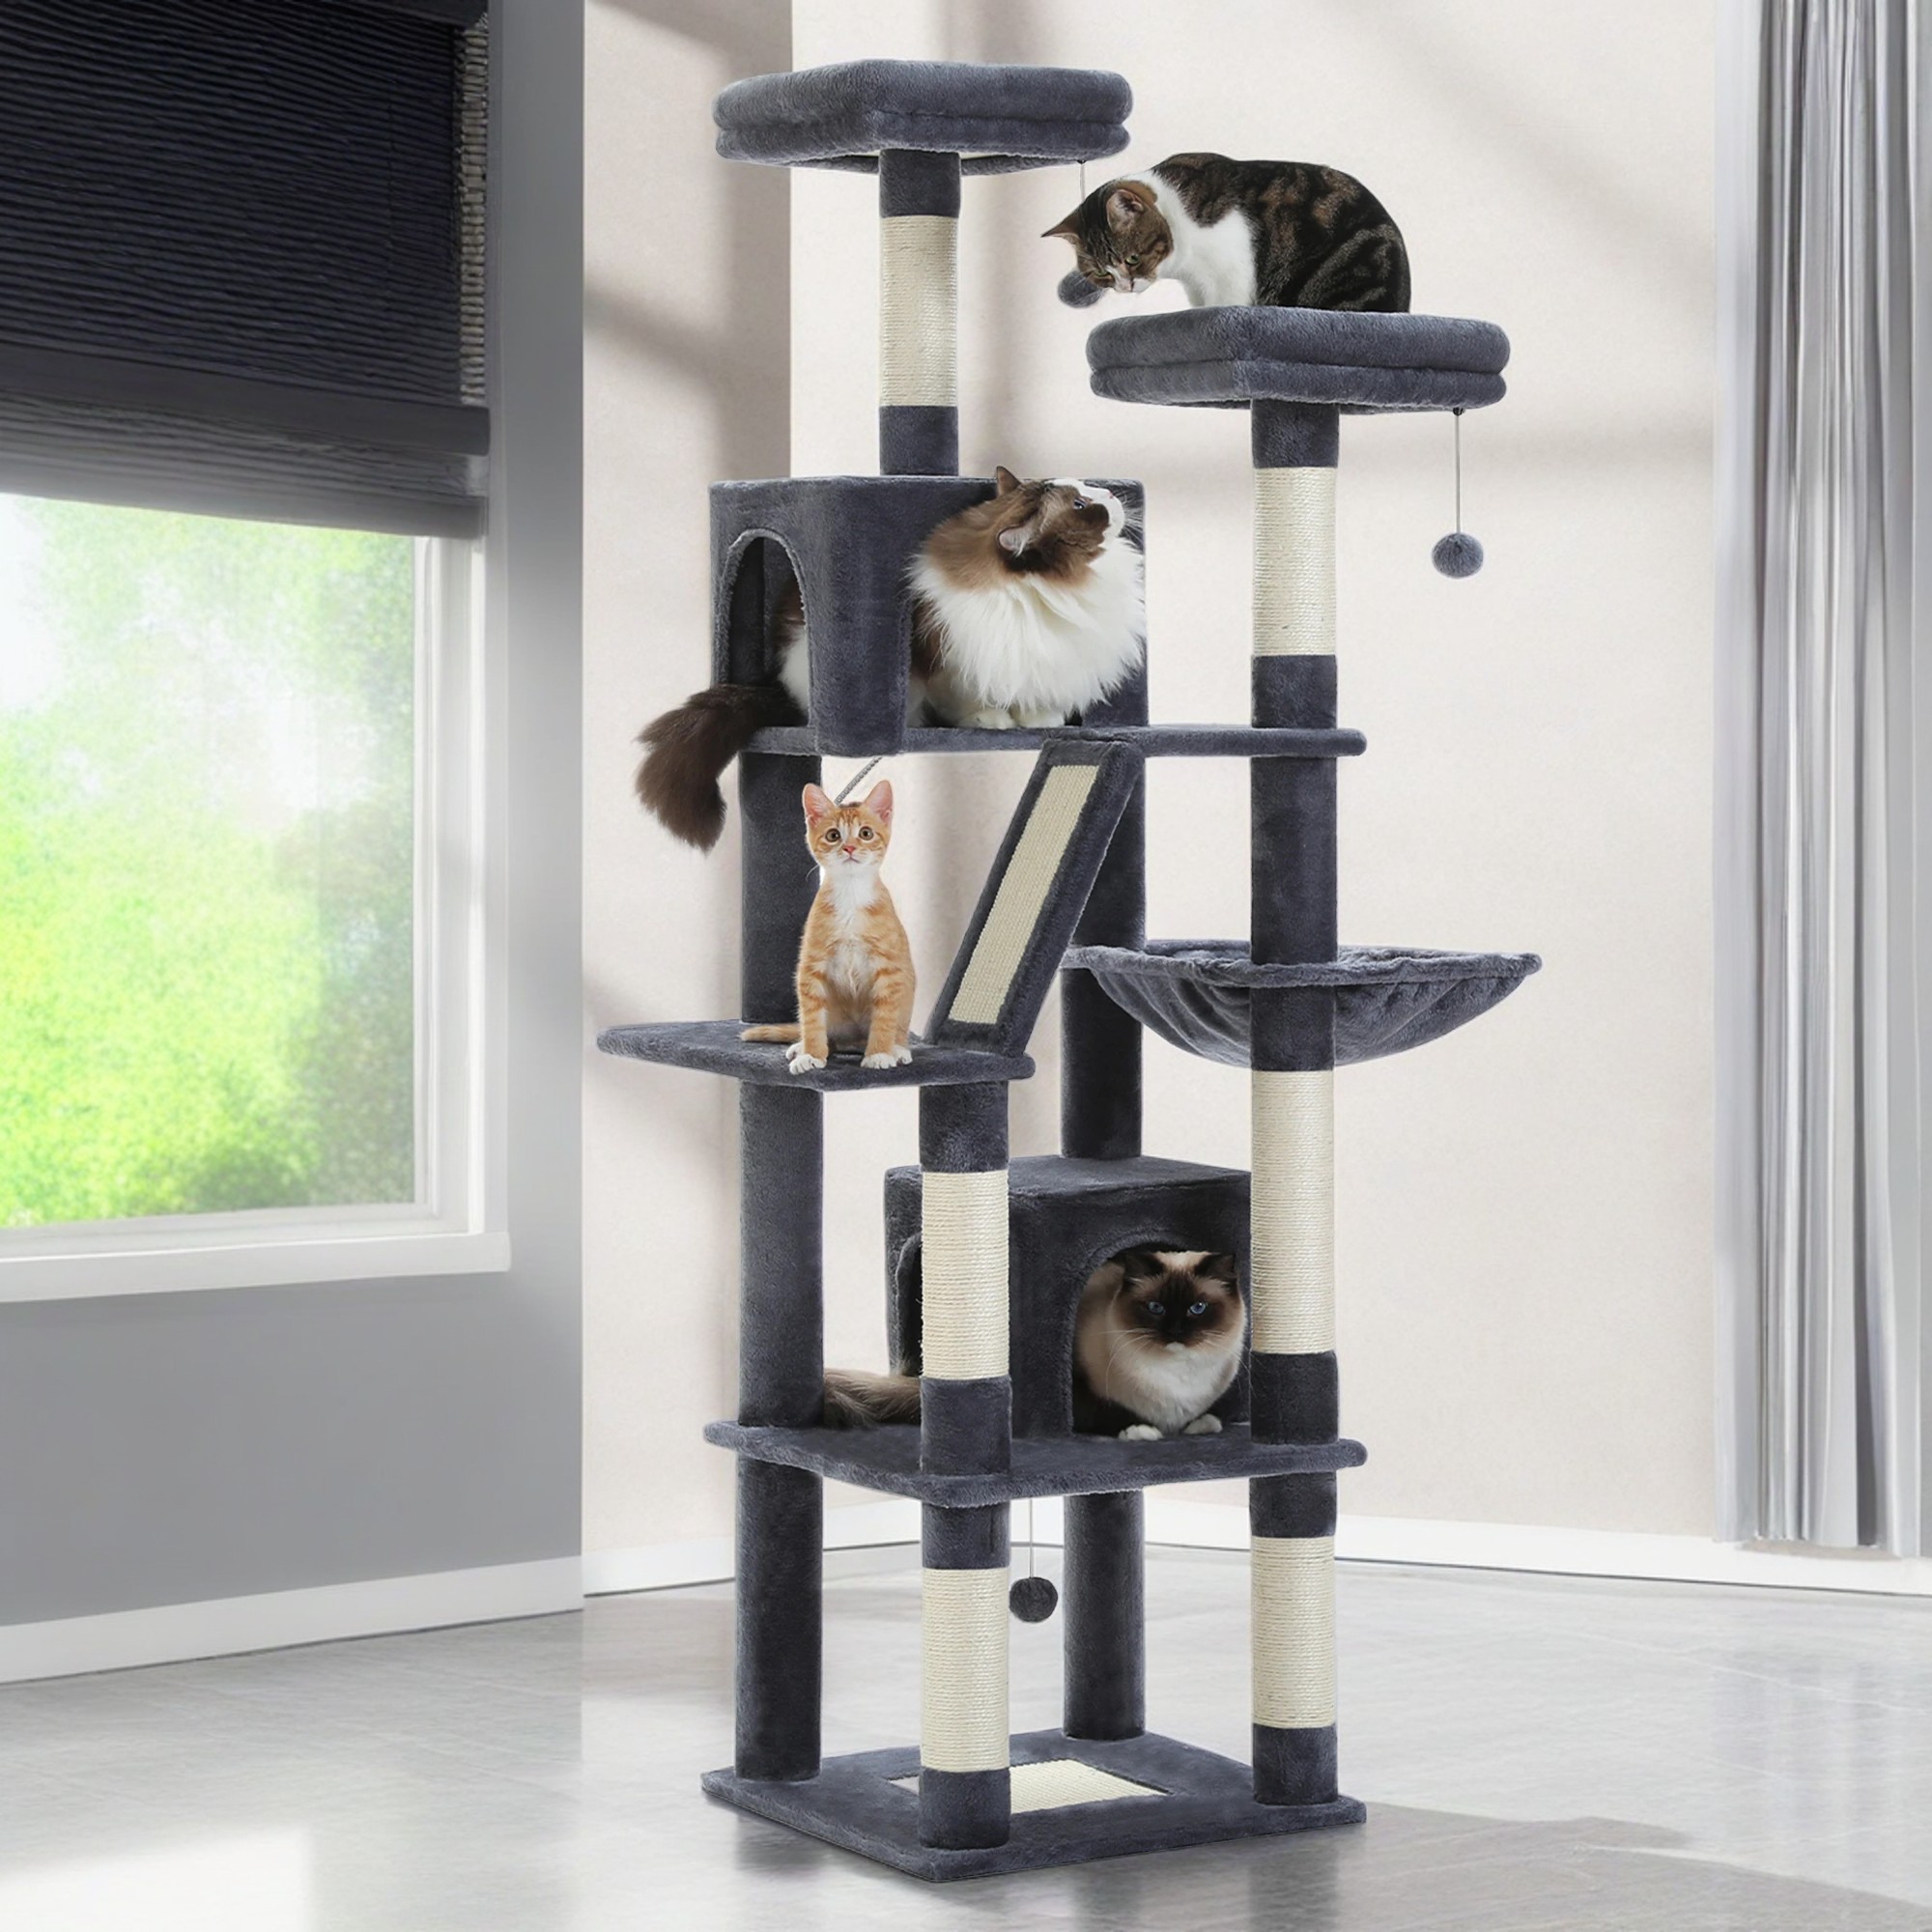 Pefilos 70" Large Cat Tree for Indoor Cats, Multi-Level Cat Tower Cat Scratching Post with 2 Perches, 2 Condos, Hammock and 2 Pompoms, Dark Gray